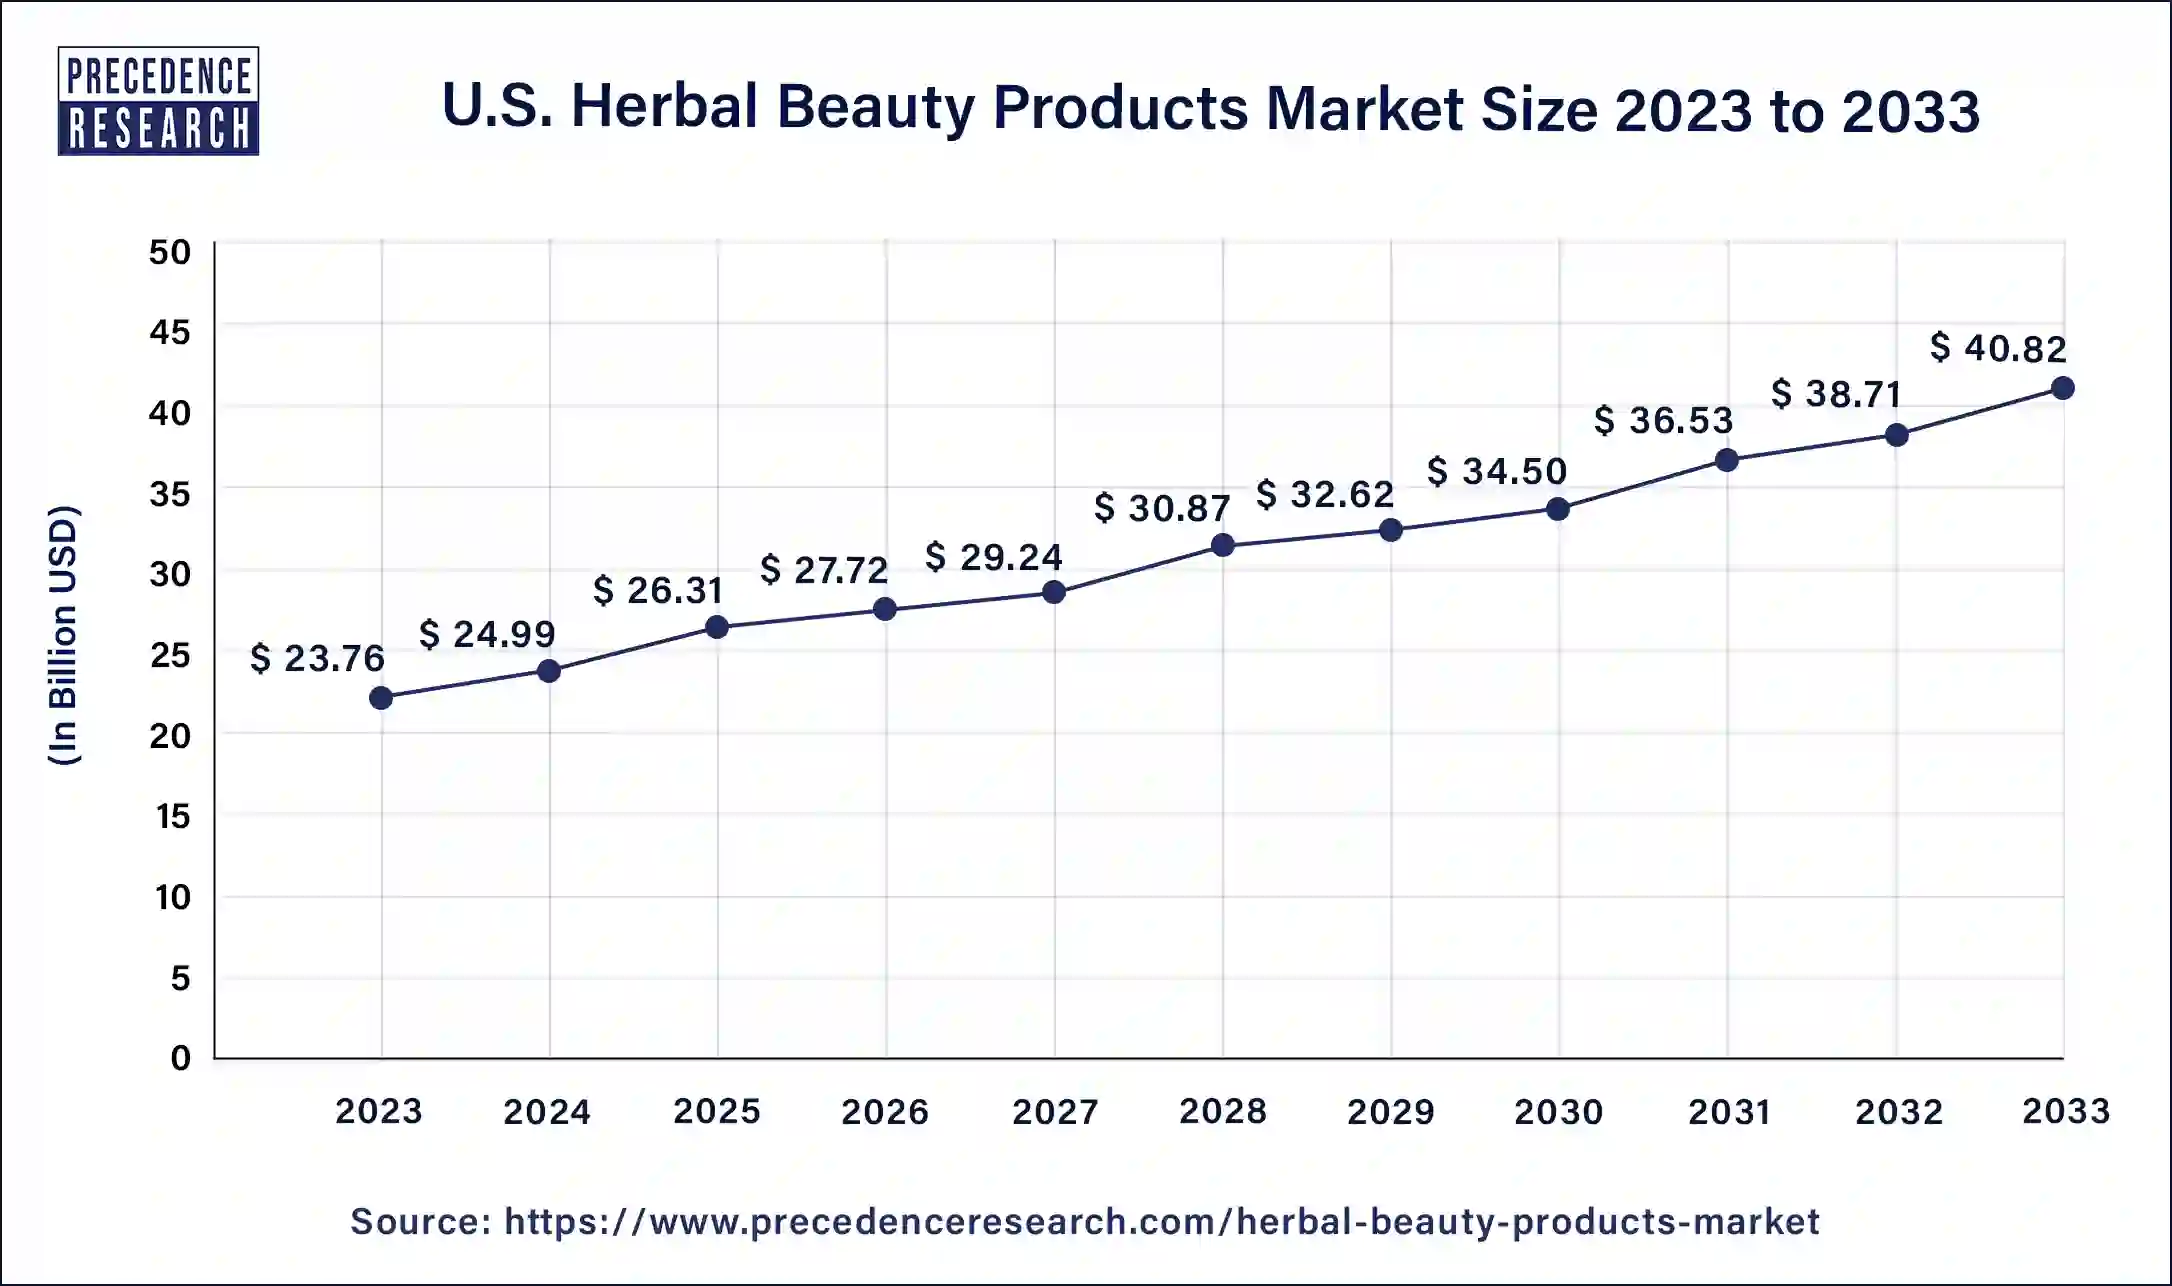 U.S. Herbal Beauty Products Market Size 2024 to 2033